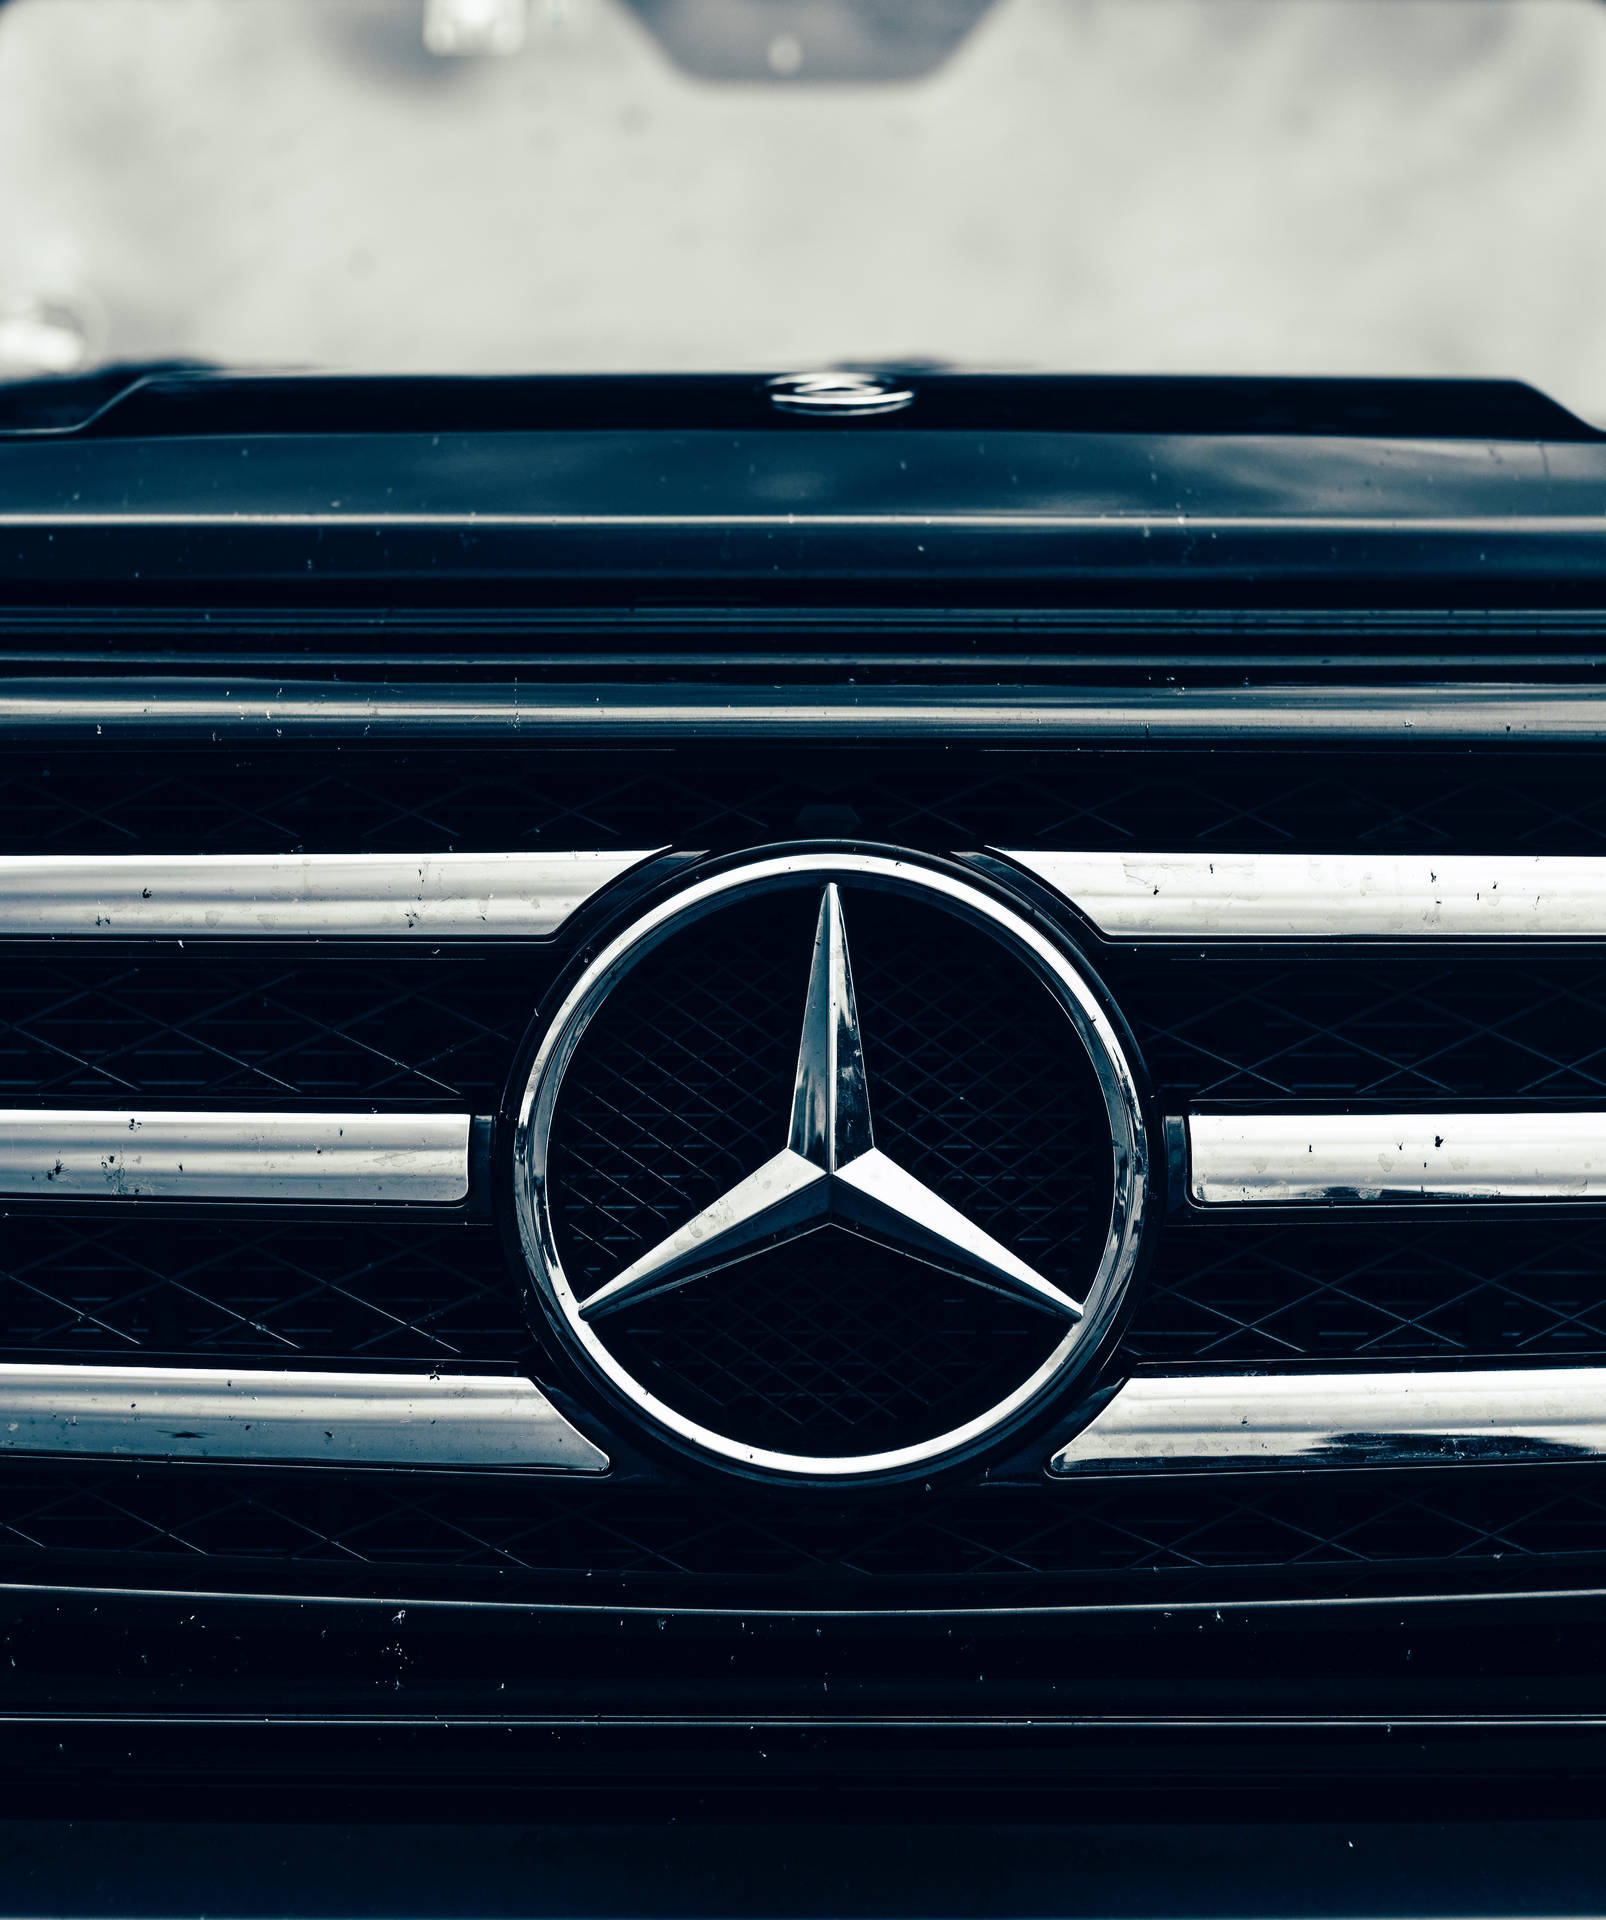 Mercedes 4147X4959 Wallpaper and Background Image